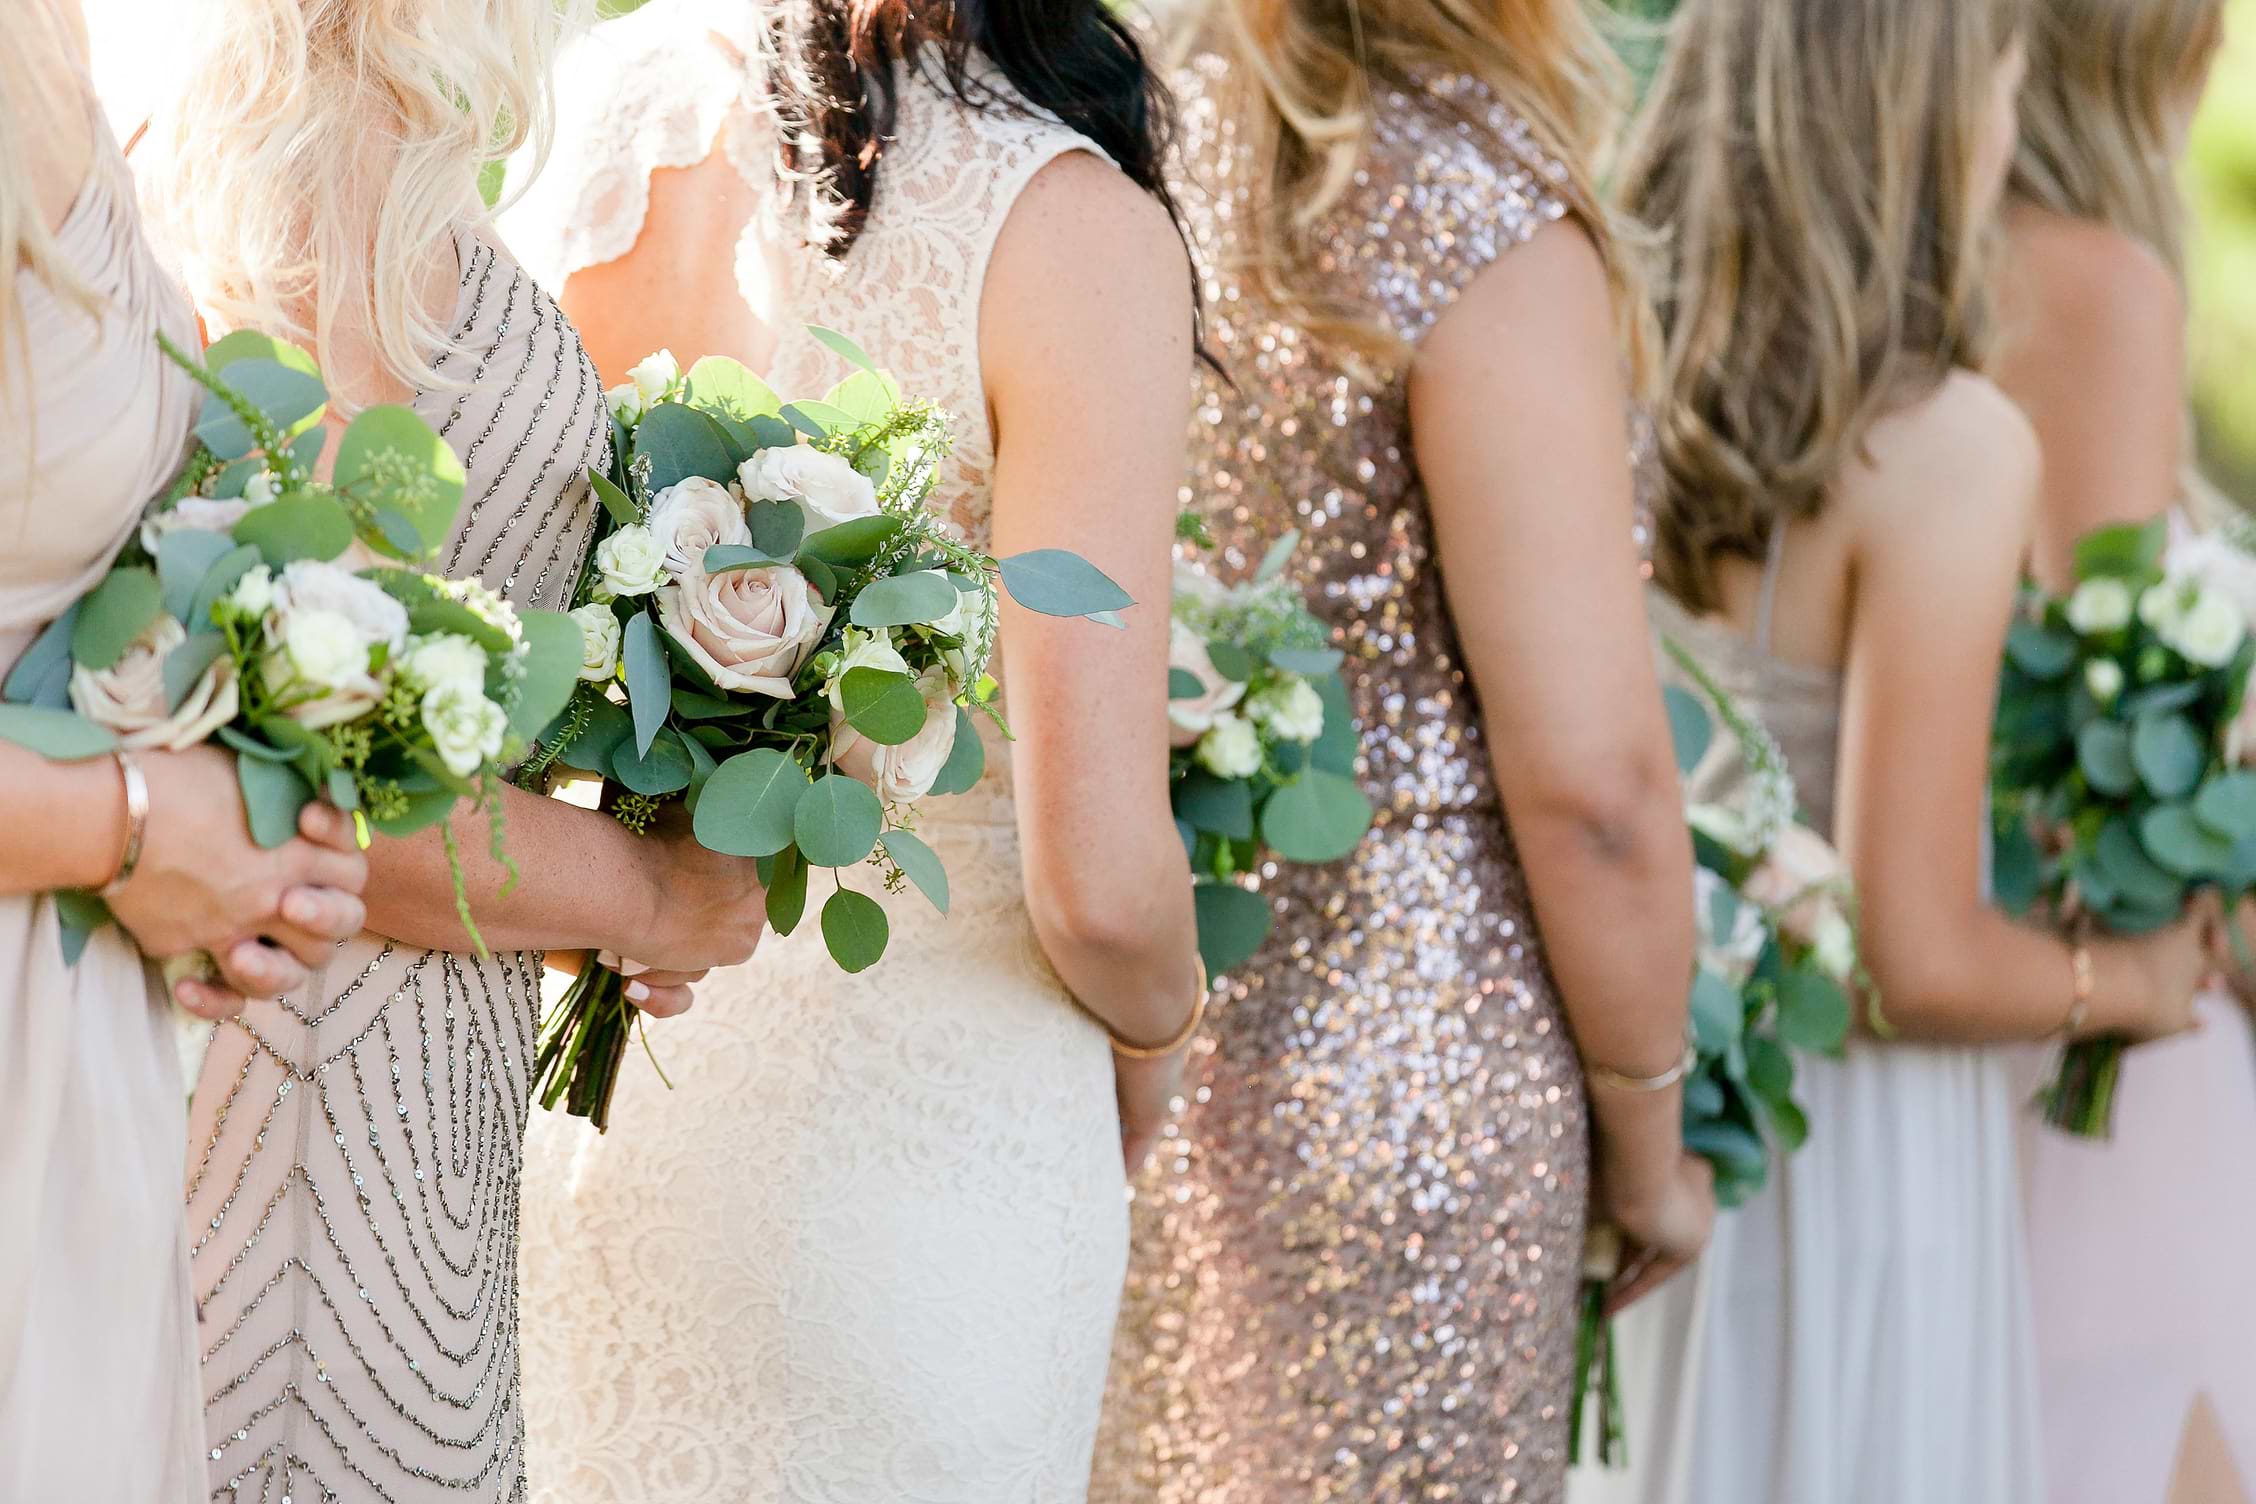 Bridesmaid Dresses with Texture